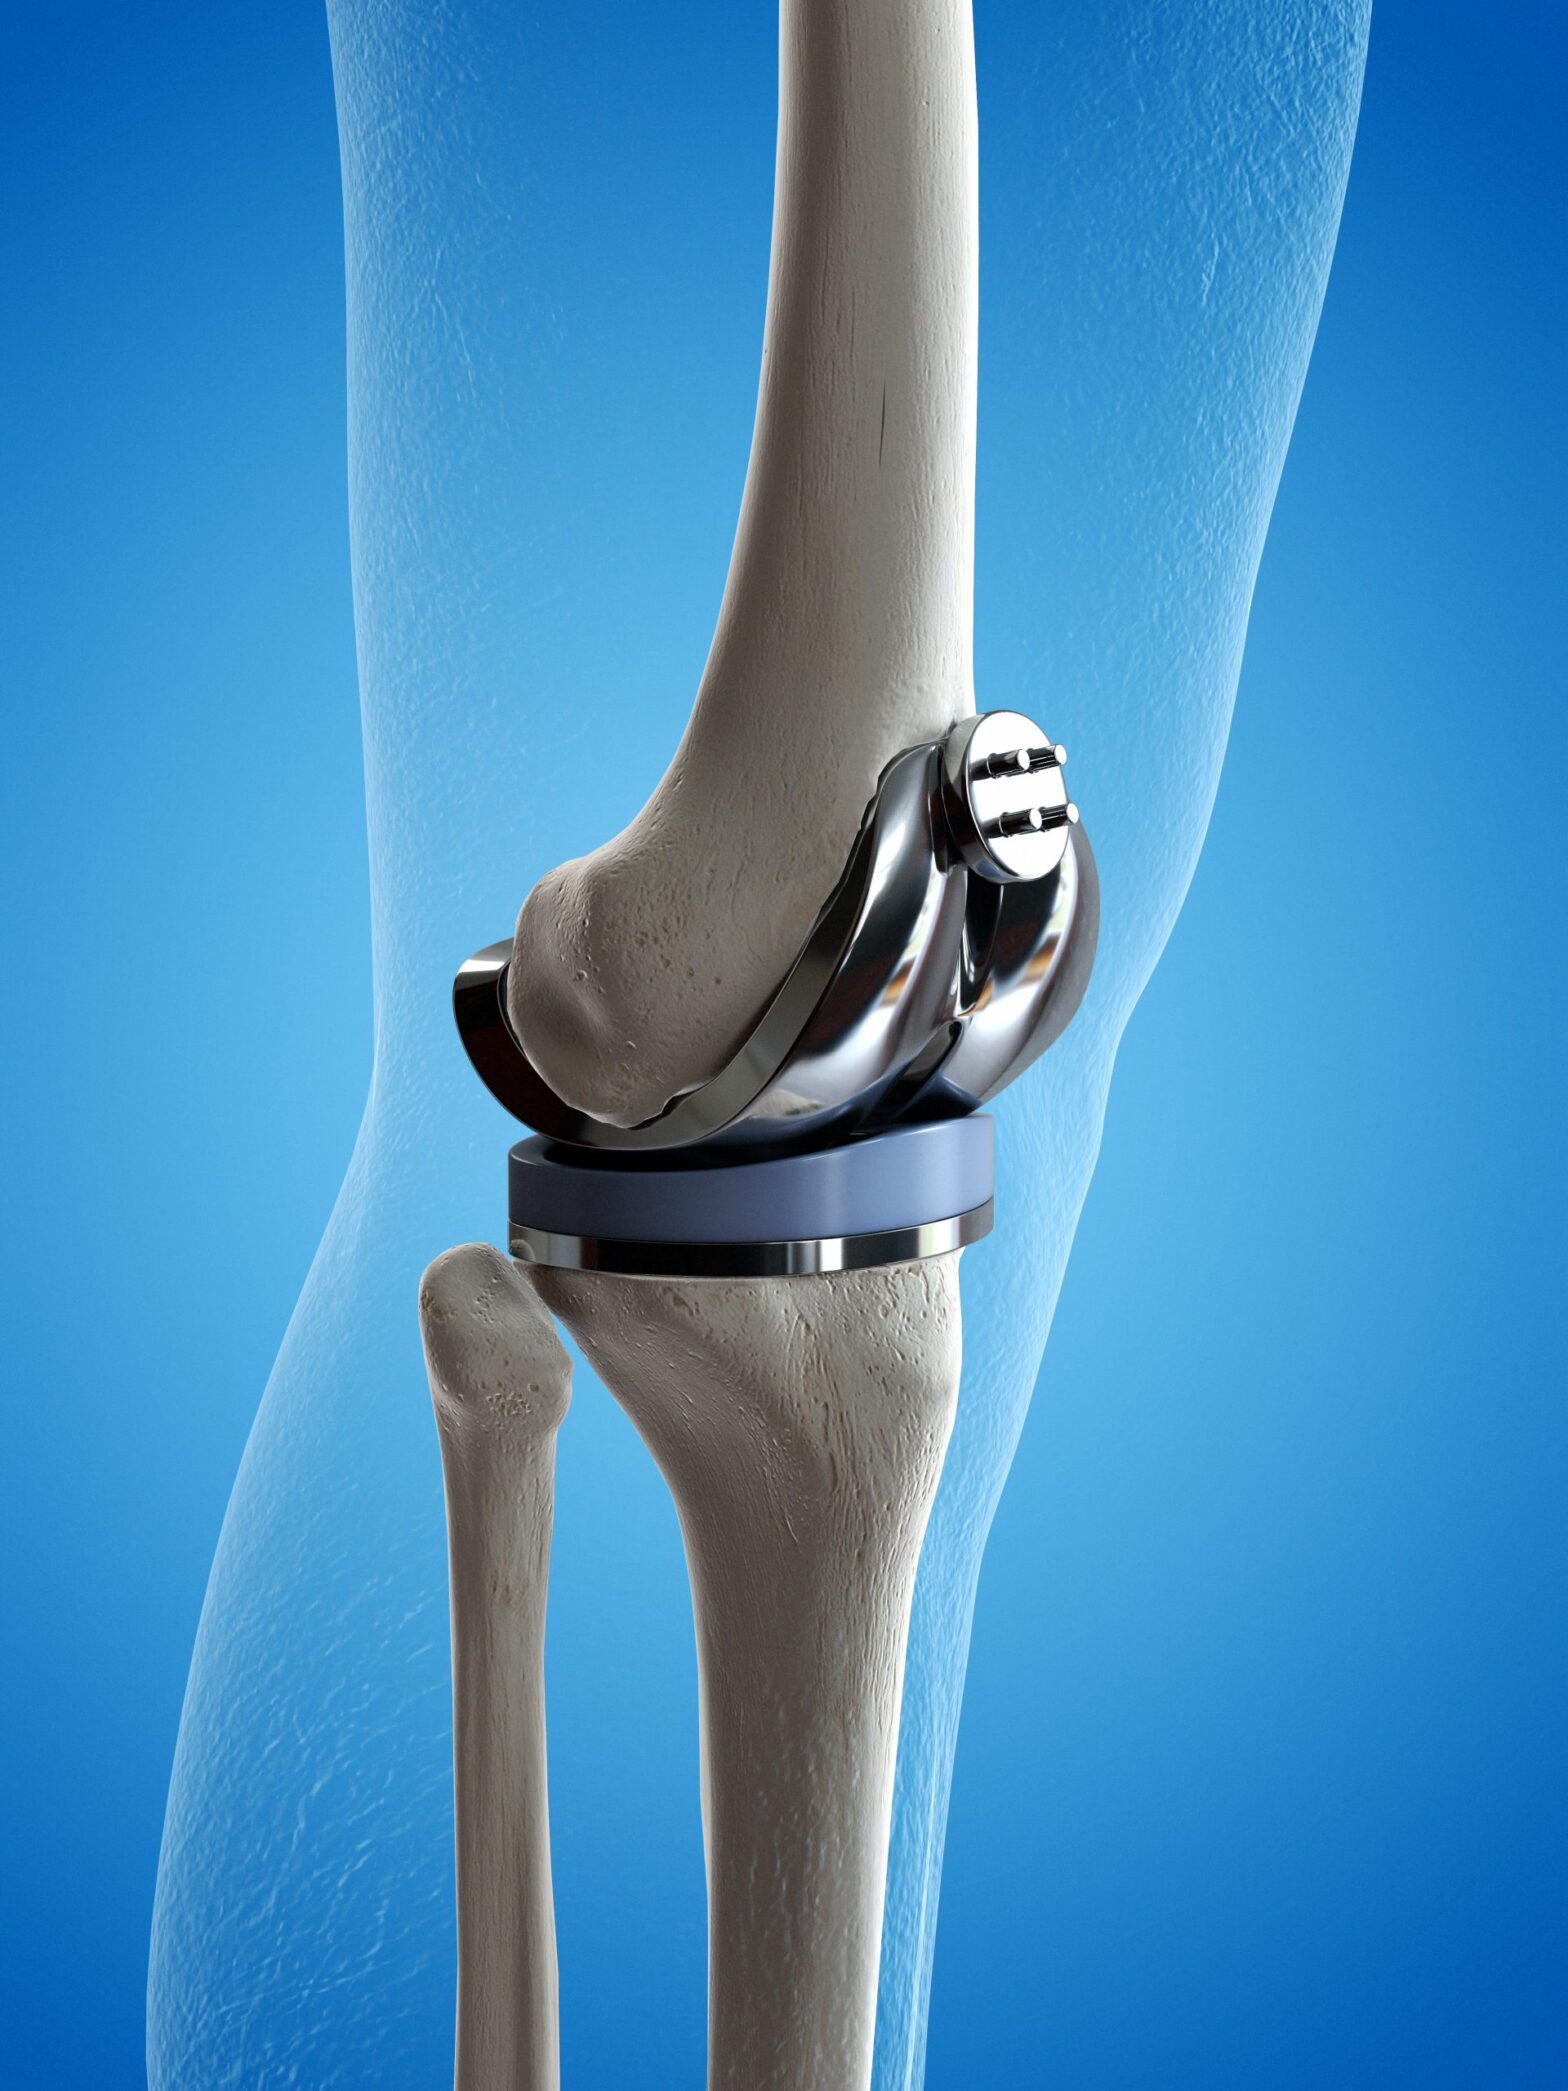 Global Knee Replacement Industry